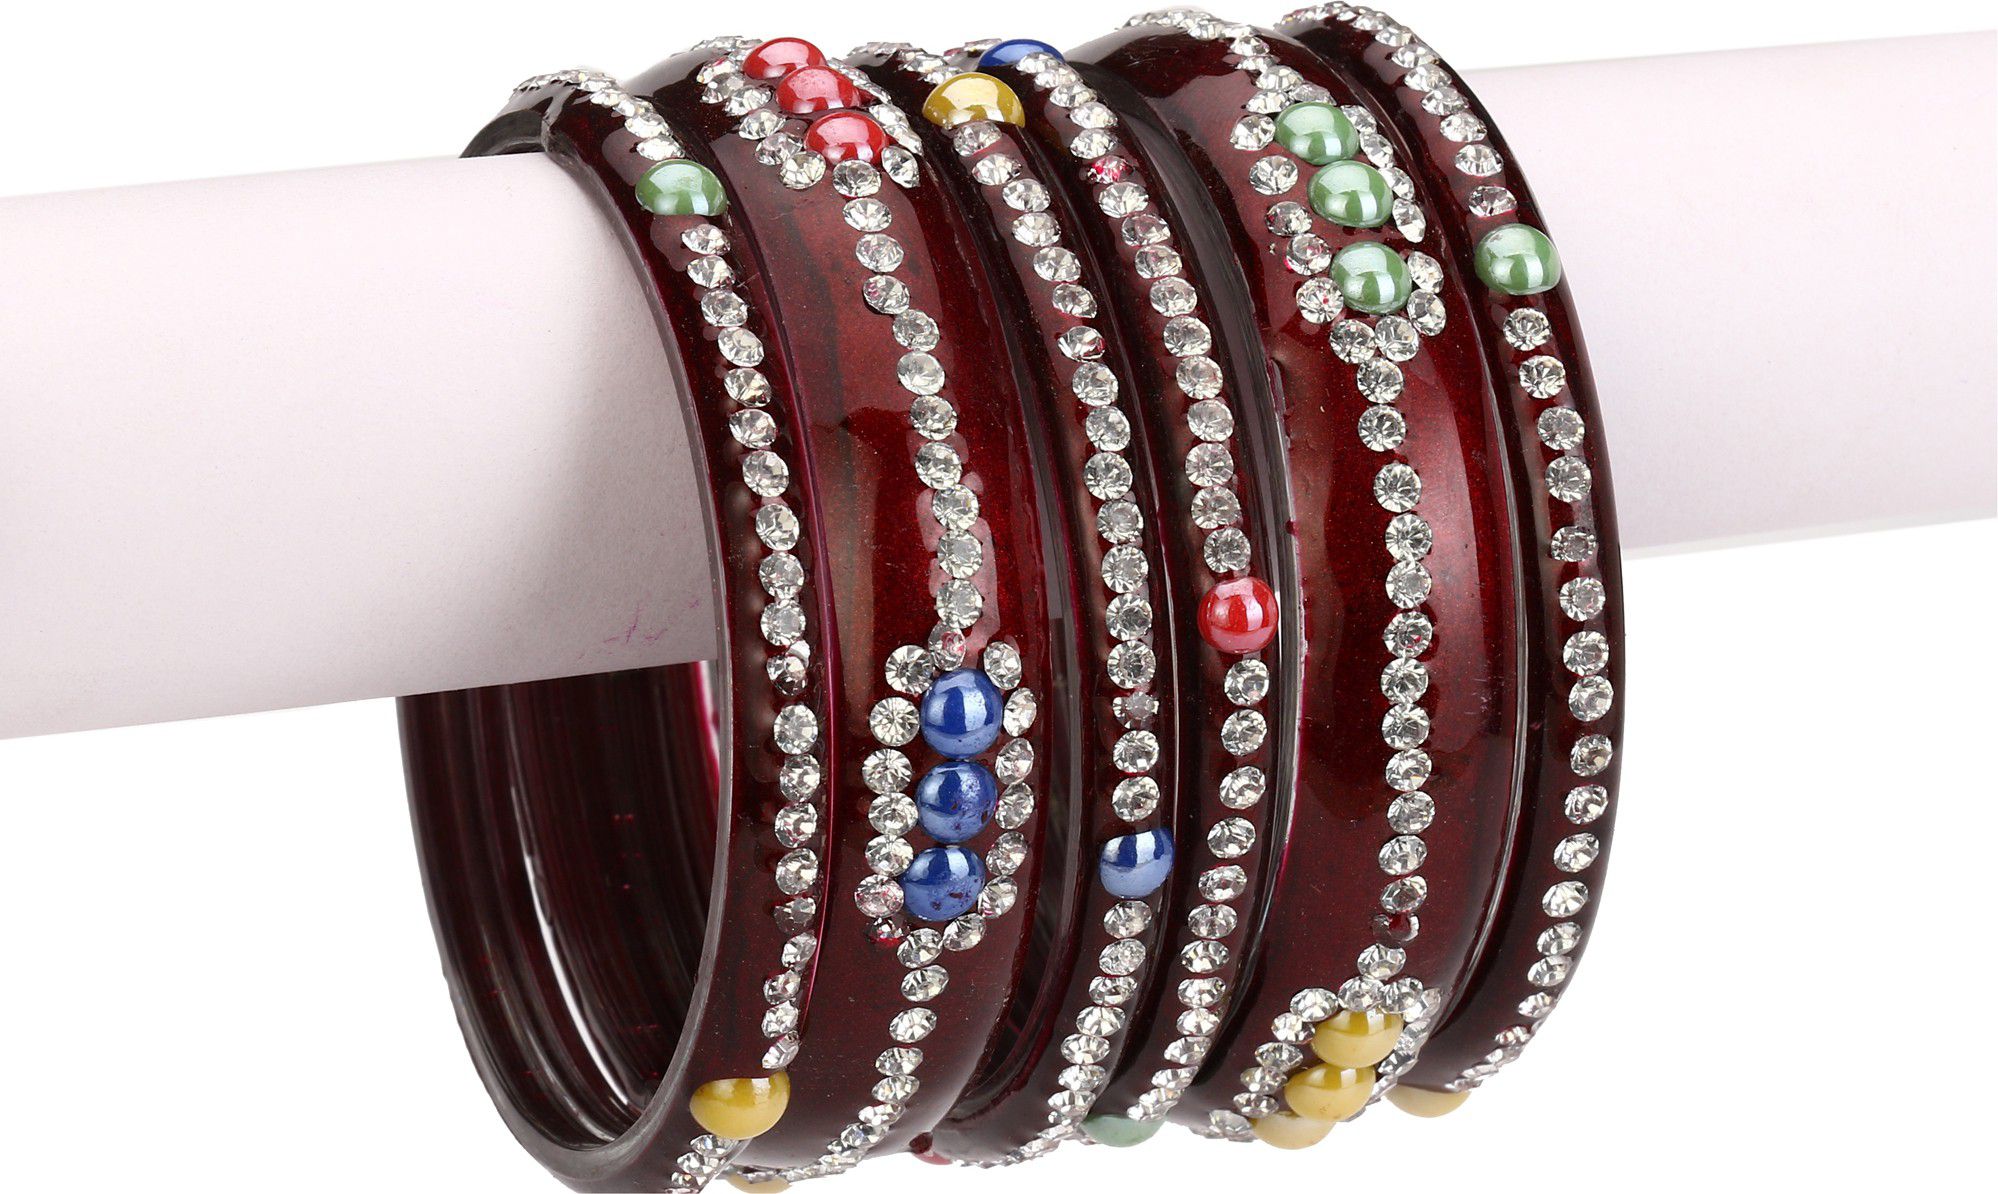     			Somil Maroon Color 2 & 4 Bangle Set decorative With Colorful Beads & Stones With Safety Box-DO_2.8